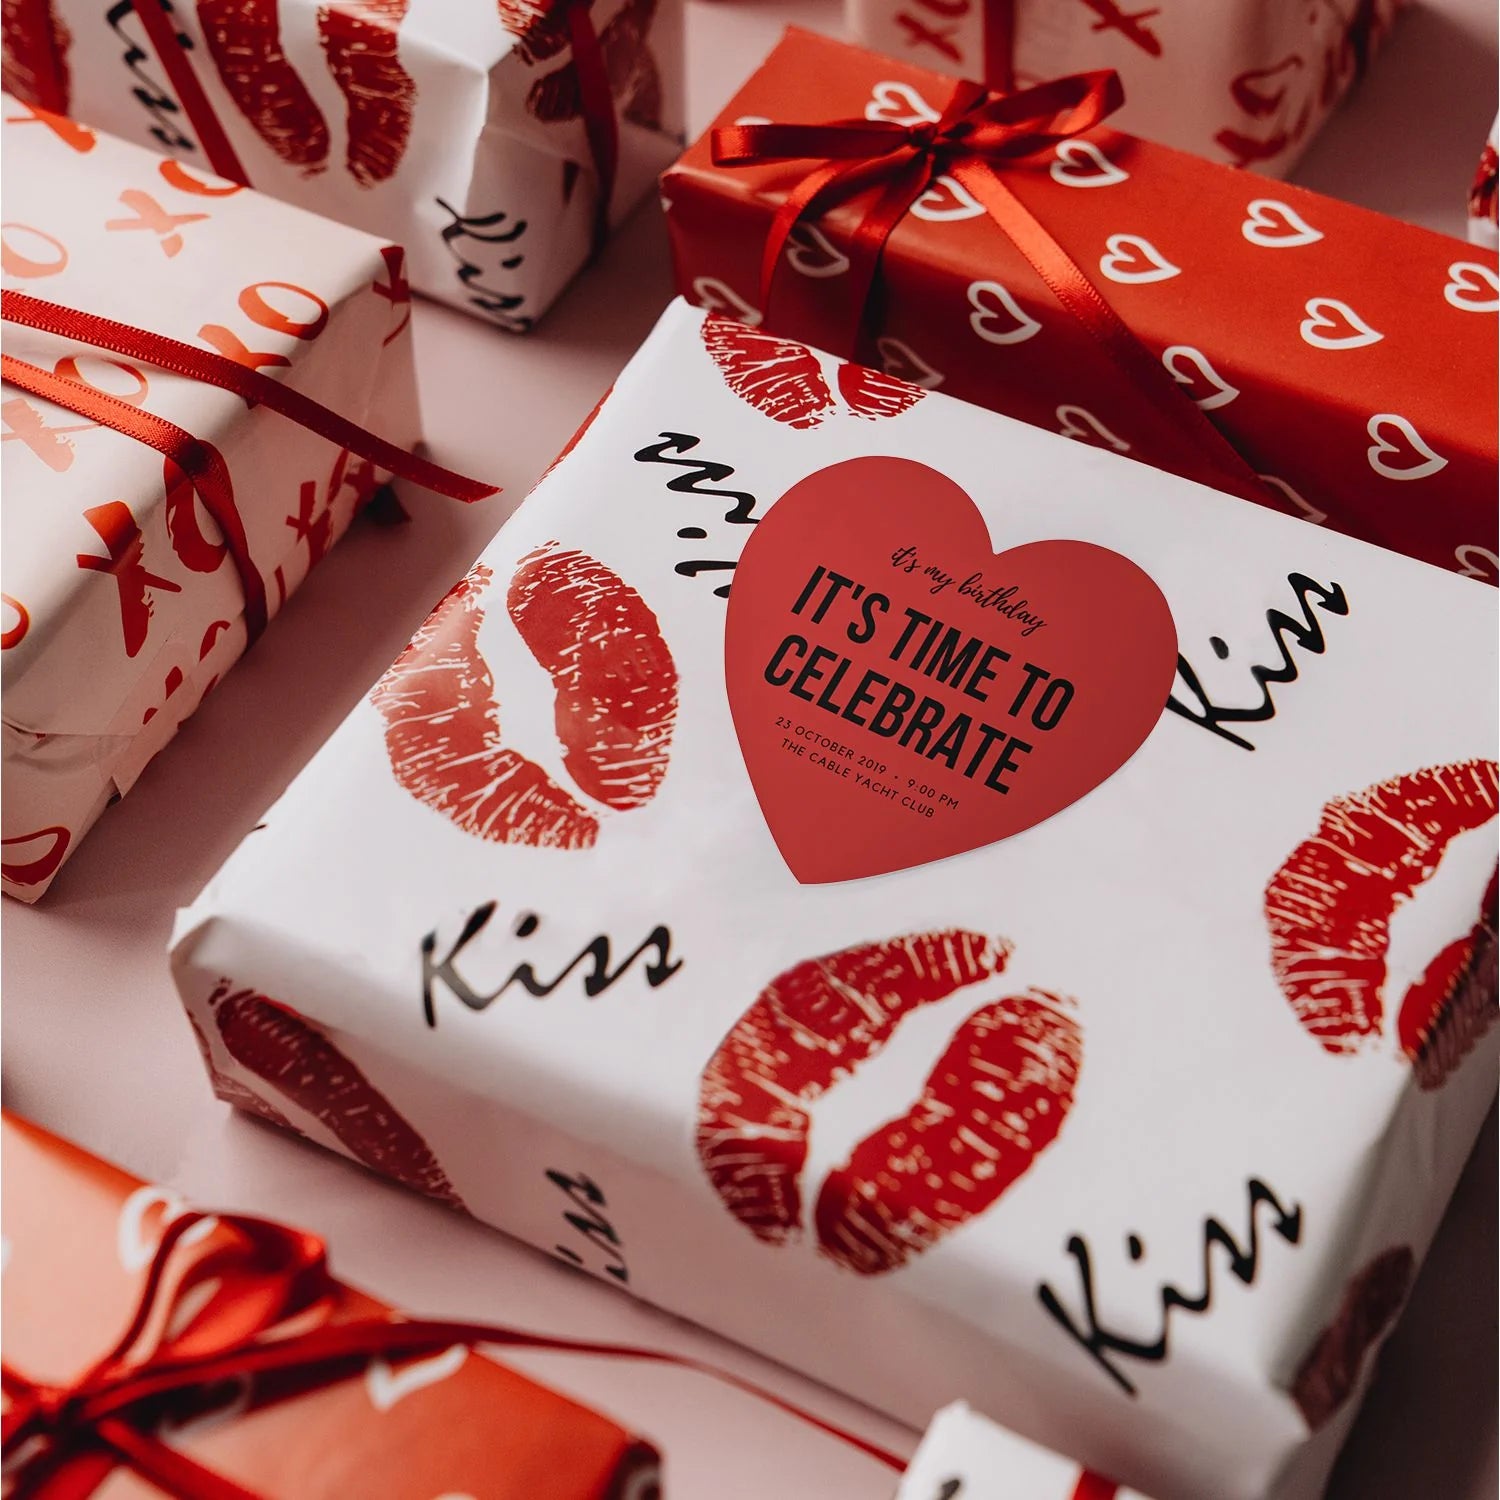 MUNBYN heart-shaped labels can be used as gift wrapping.